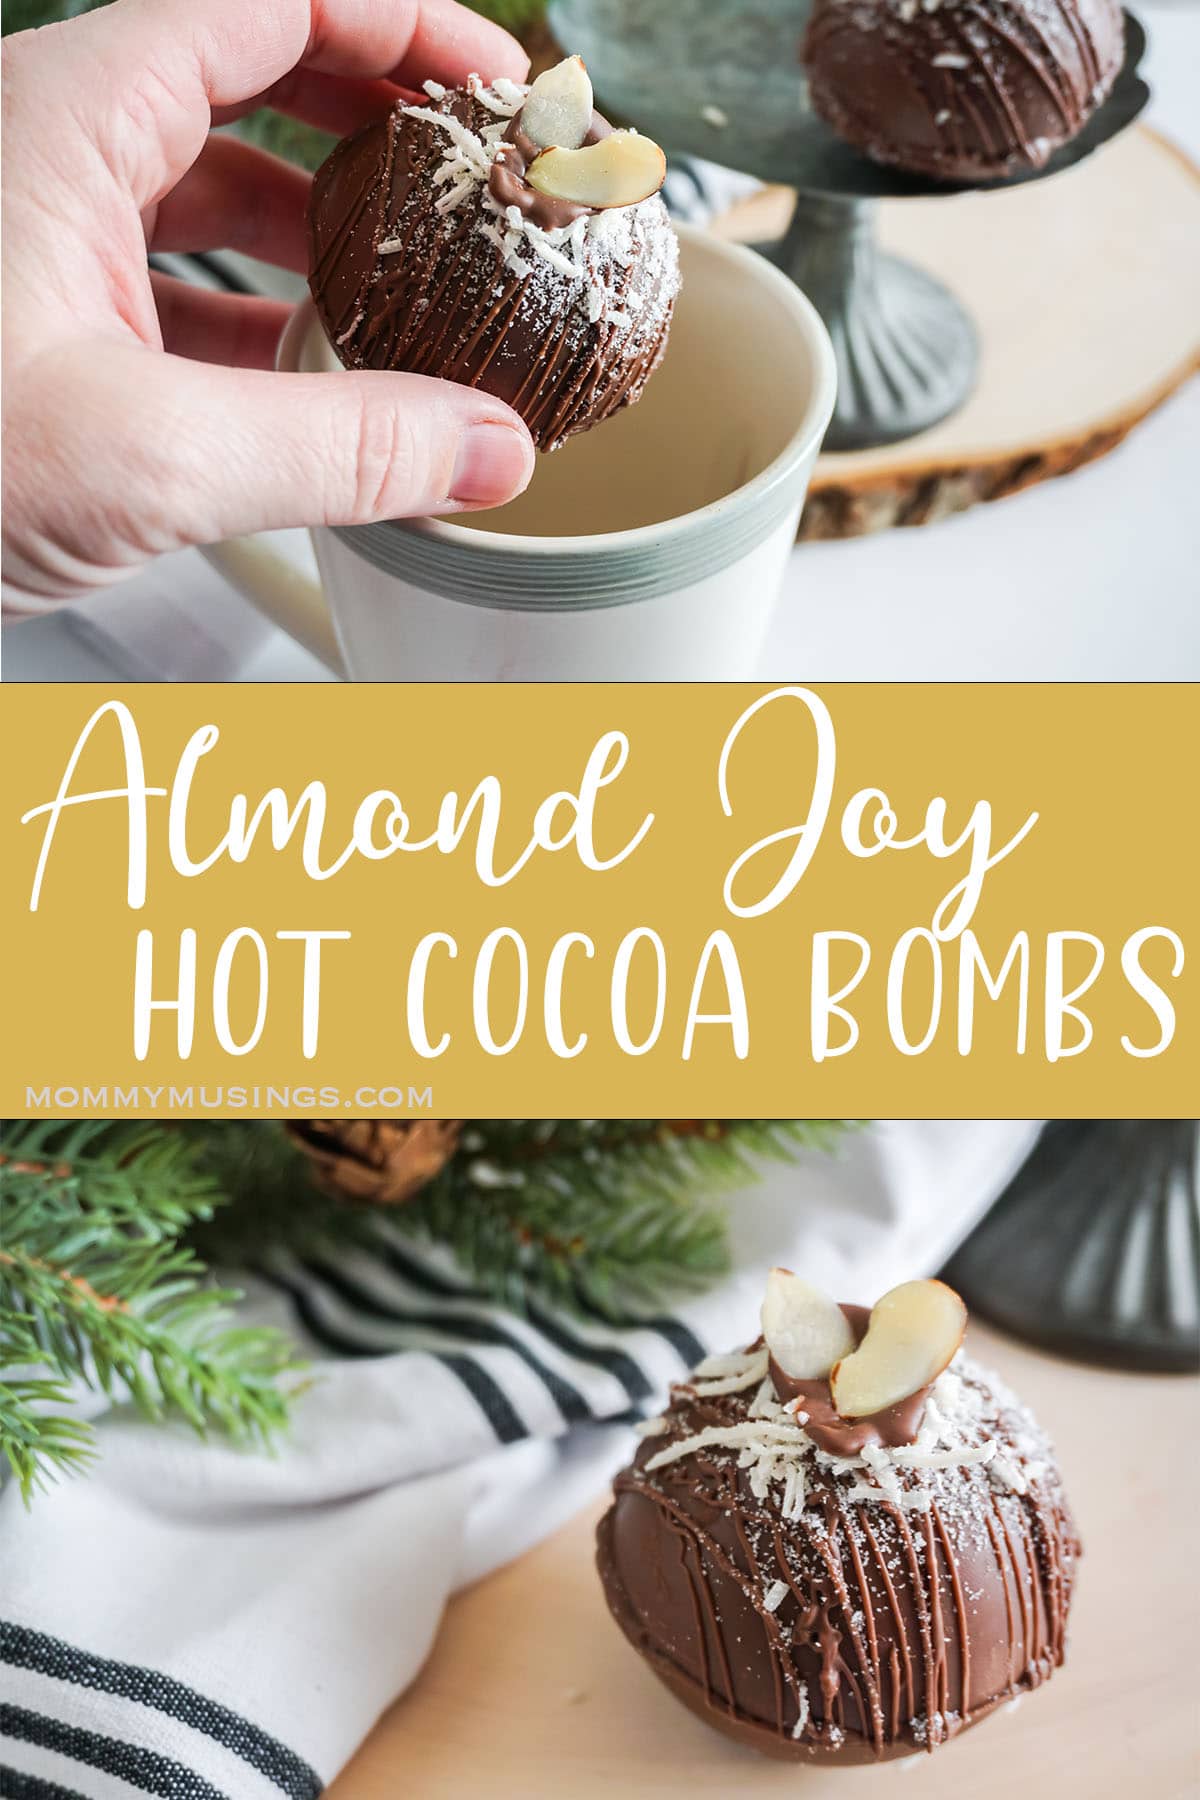 photo collage of homemade hot cocoa bombs with text which reads Almond Joy Hot Cocoa Bombs